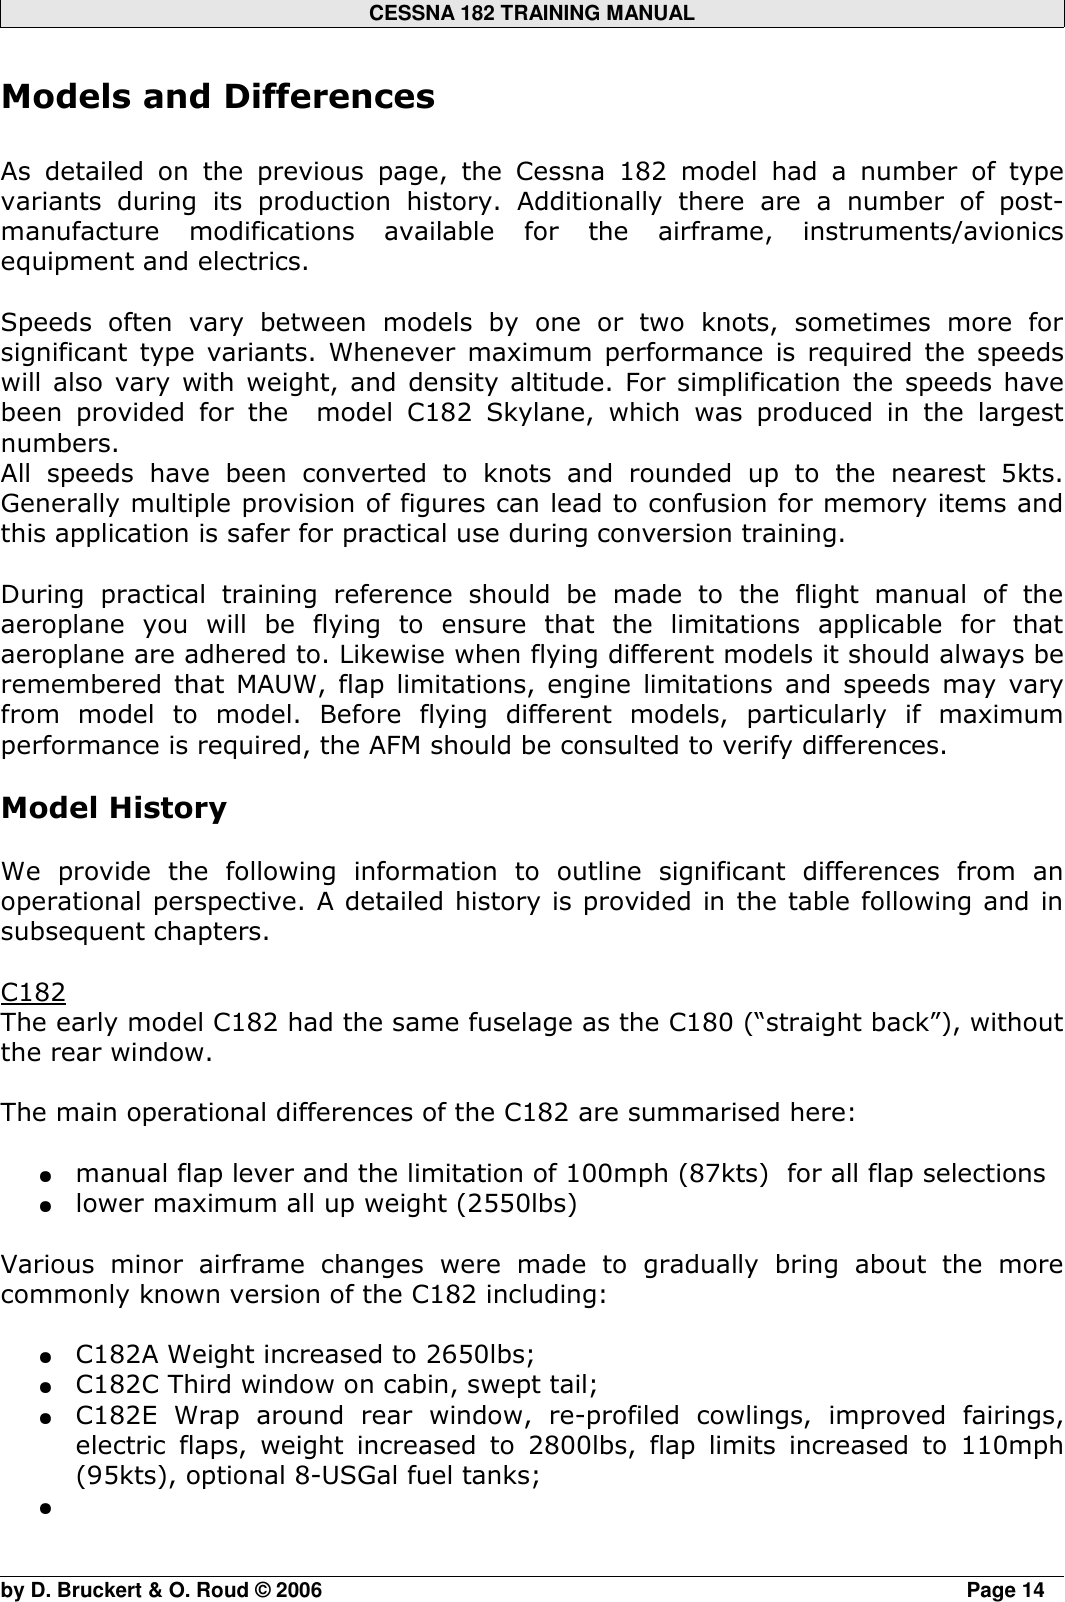 Page 1 of 12 - C182 Training Manual 1Jul2011 - Technical Cessna_C182--History_RSV-Training-Manuals_2011 Cessna C182--History RSV-Training-Manuals 2011